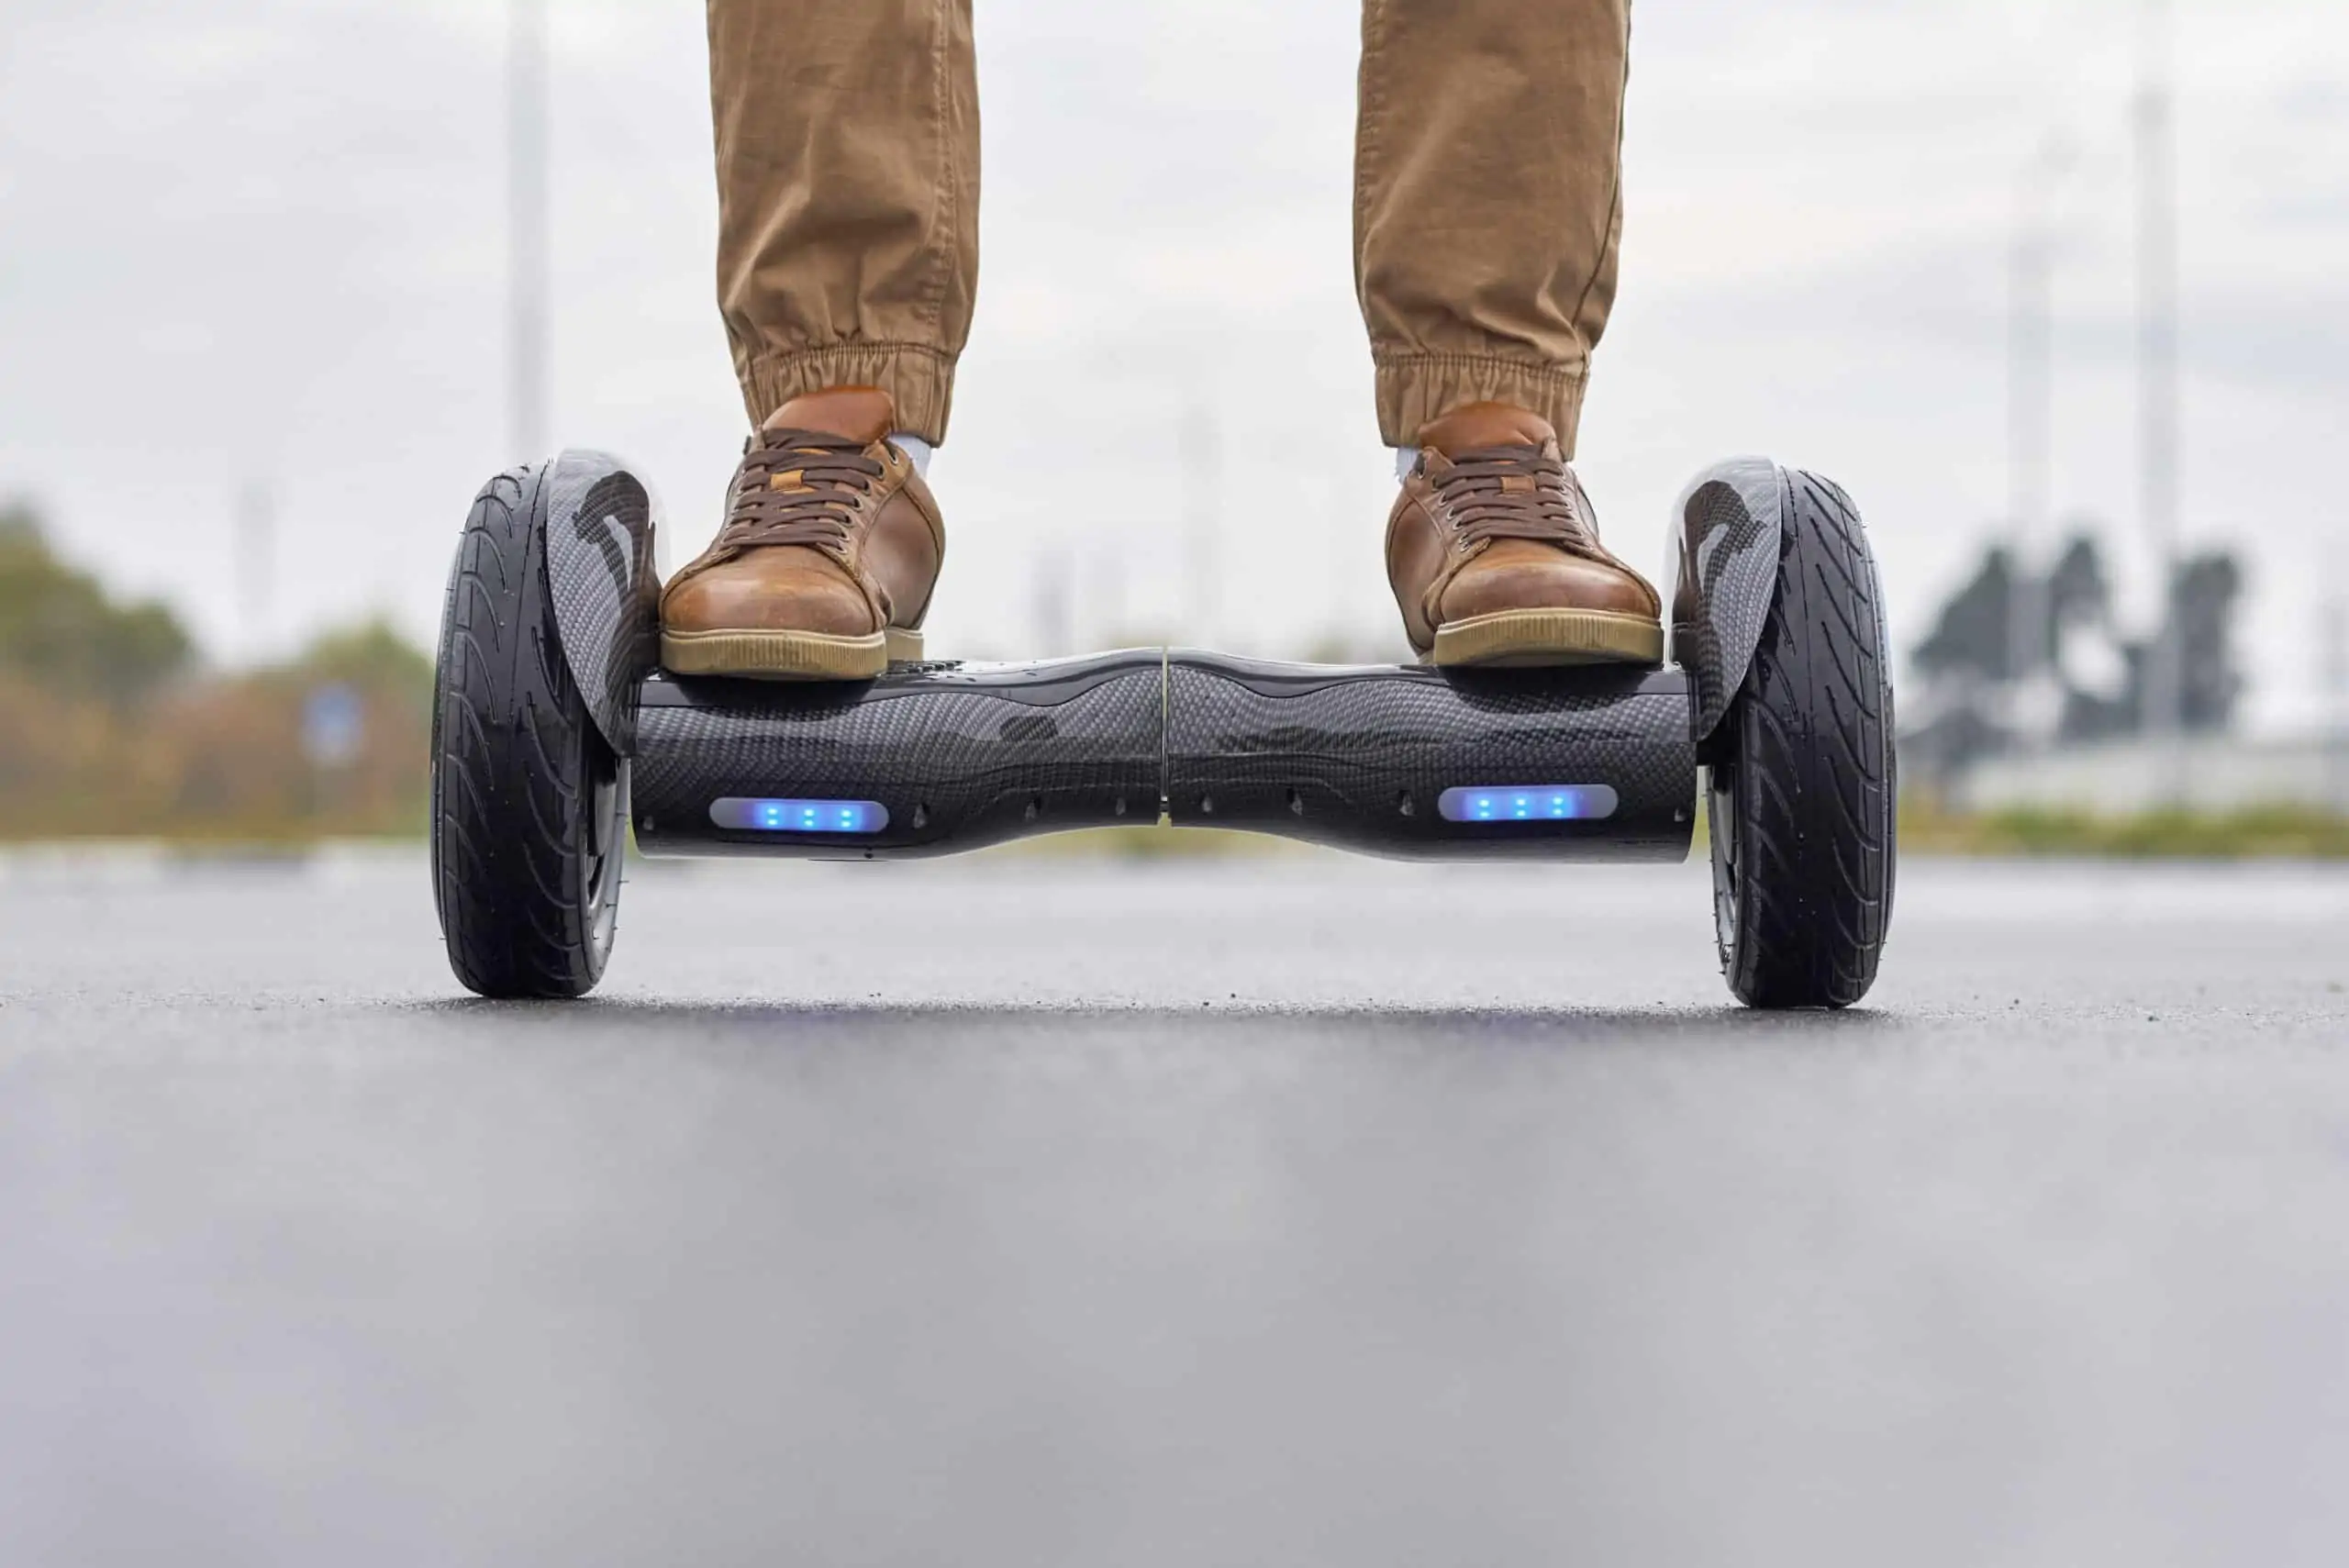 How Long Does It Take to Charge a Hoverboard? Expectations Vs. Reality